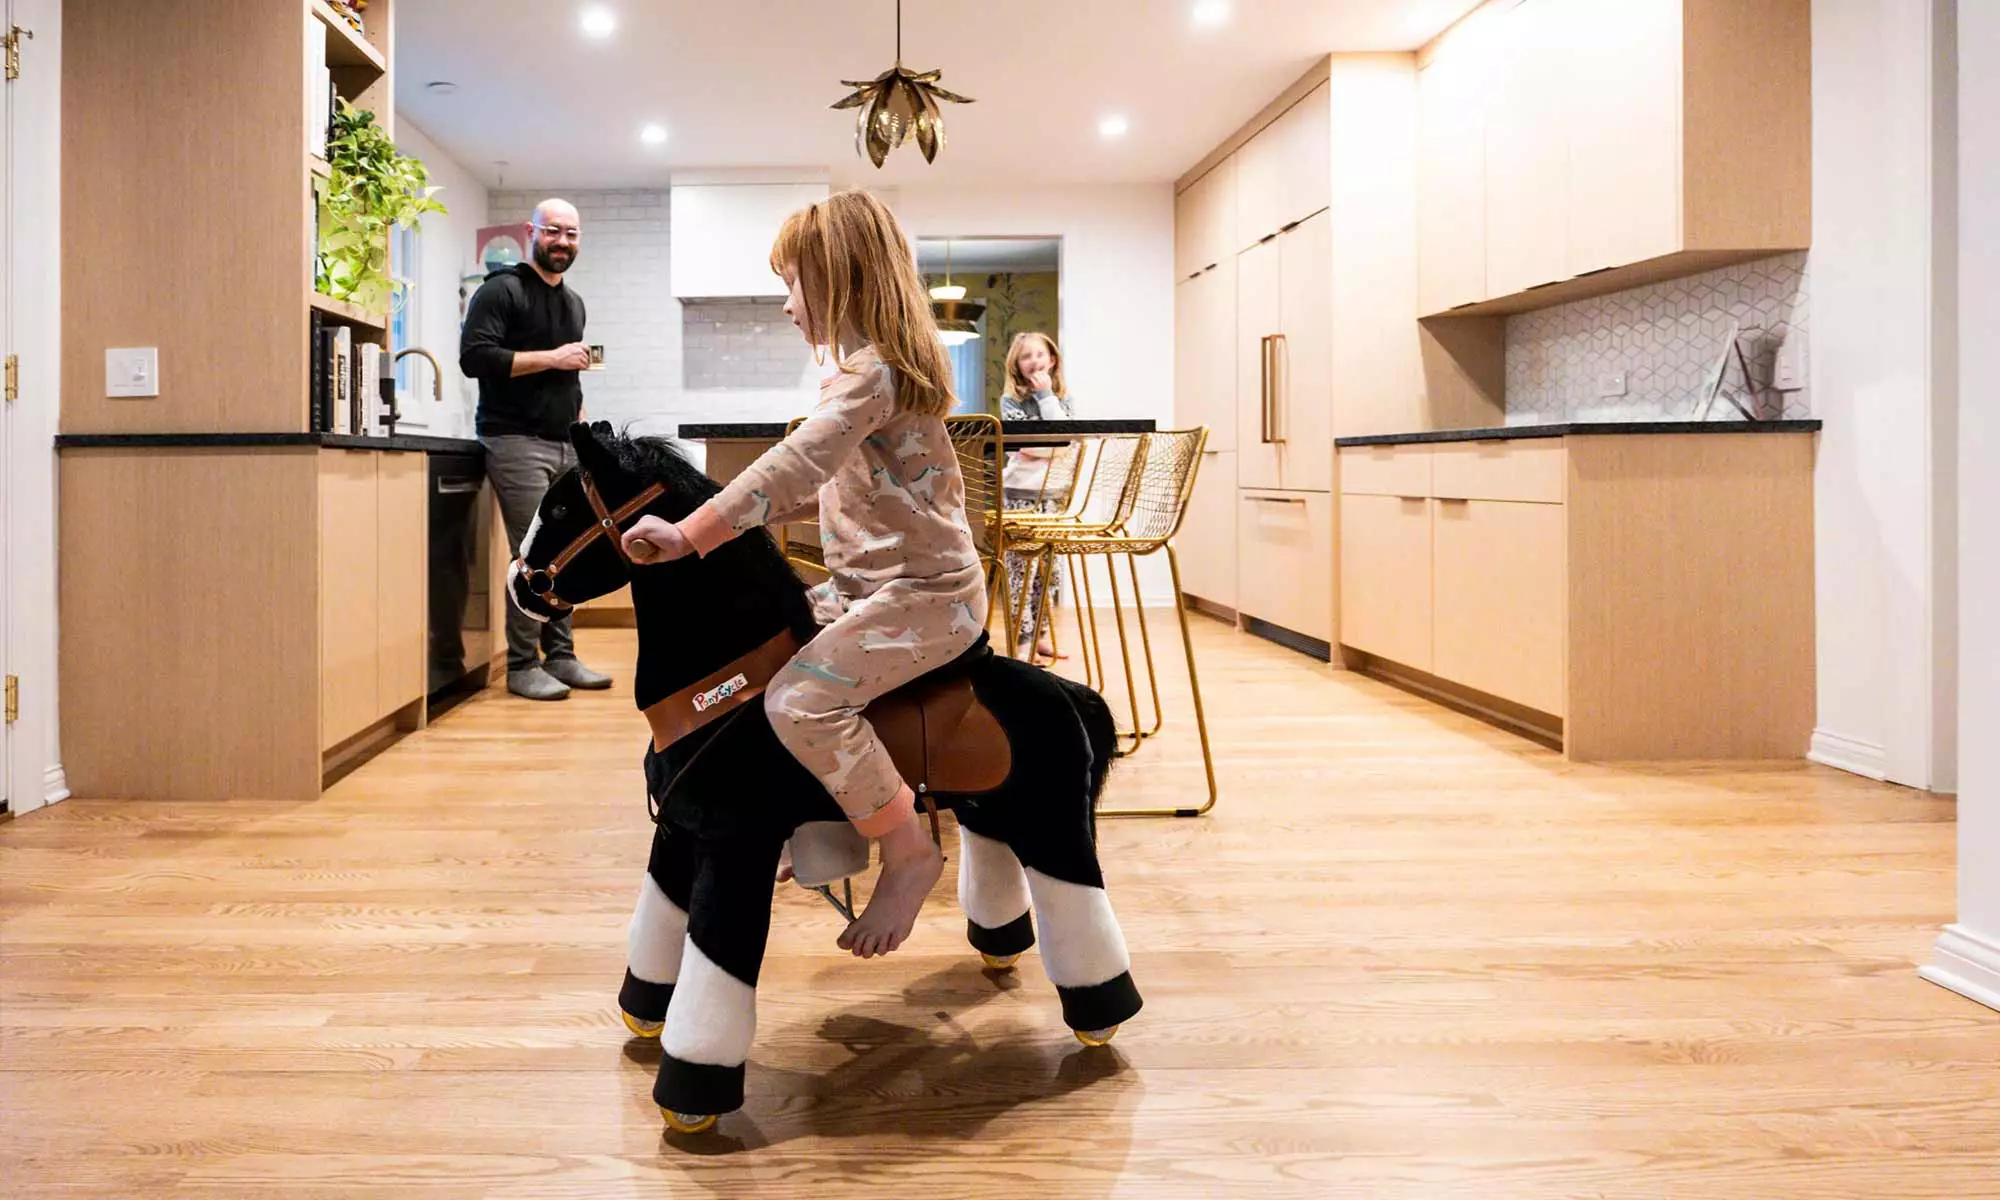 Family gathered around white oak island with black stone countertops in luxury Riverside, IL kitchen remodel with daughter riding toy horse